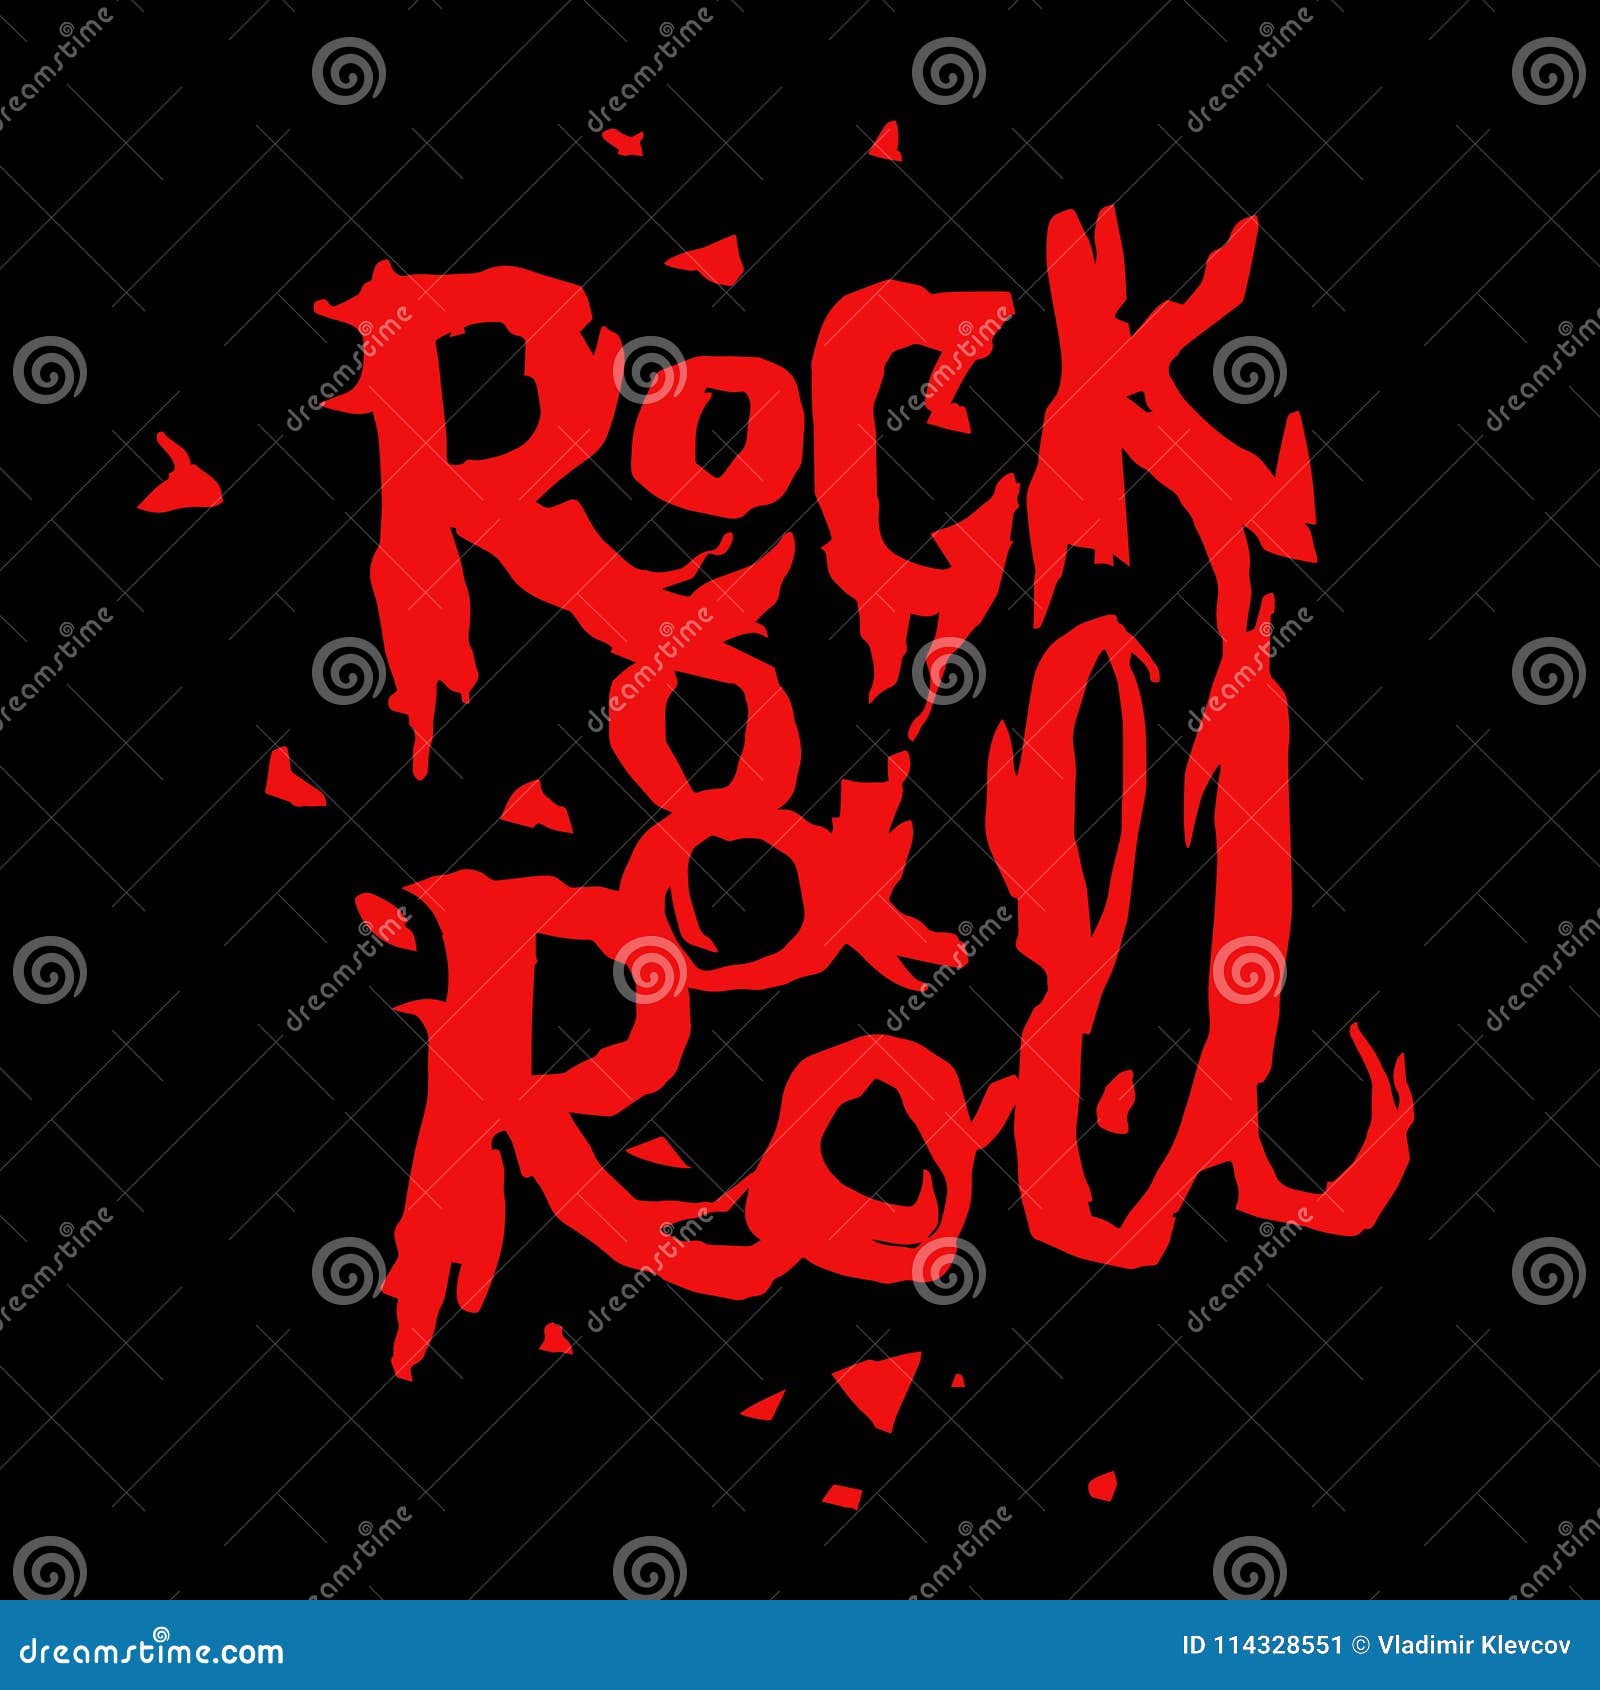 rock and roll music print